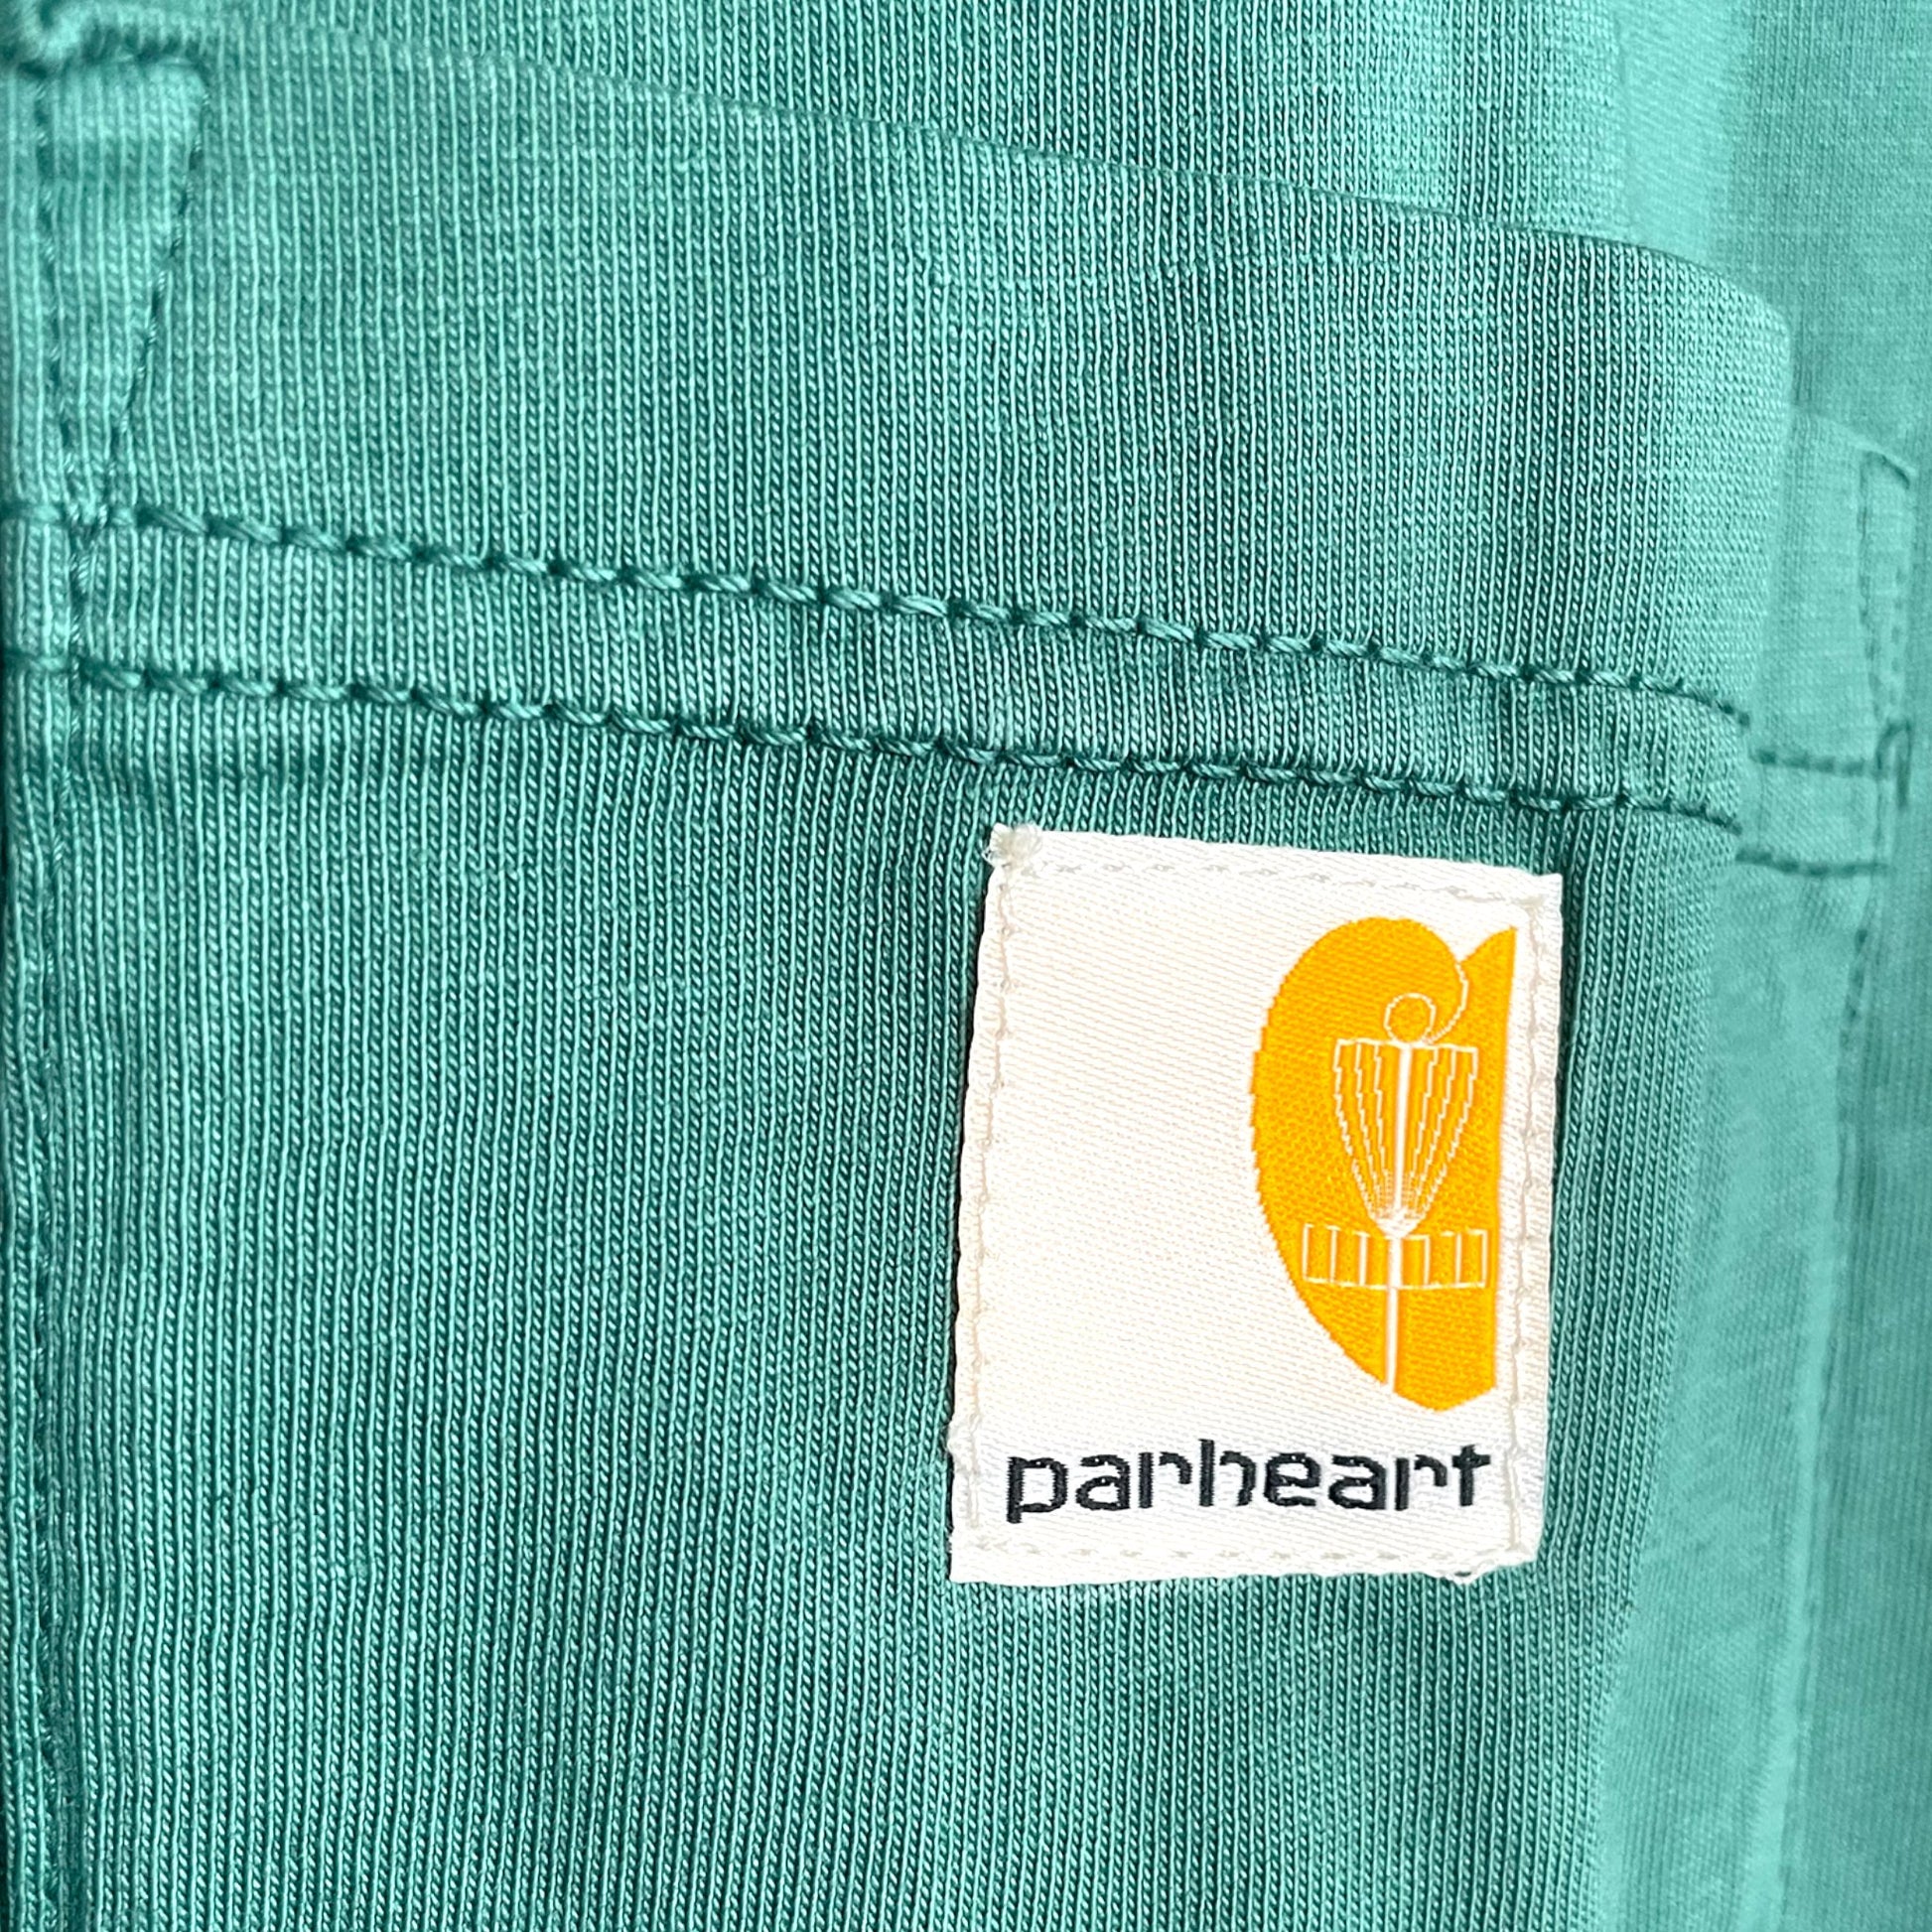 Perks and Re-creation Parheart Pocket Tee | Green Disc Golf